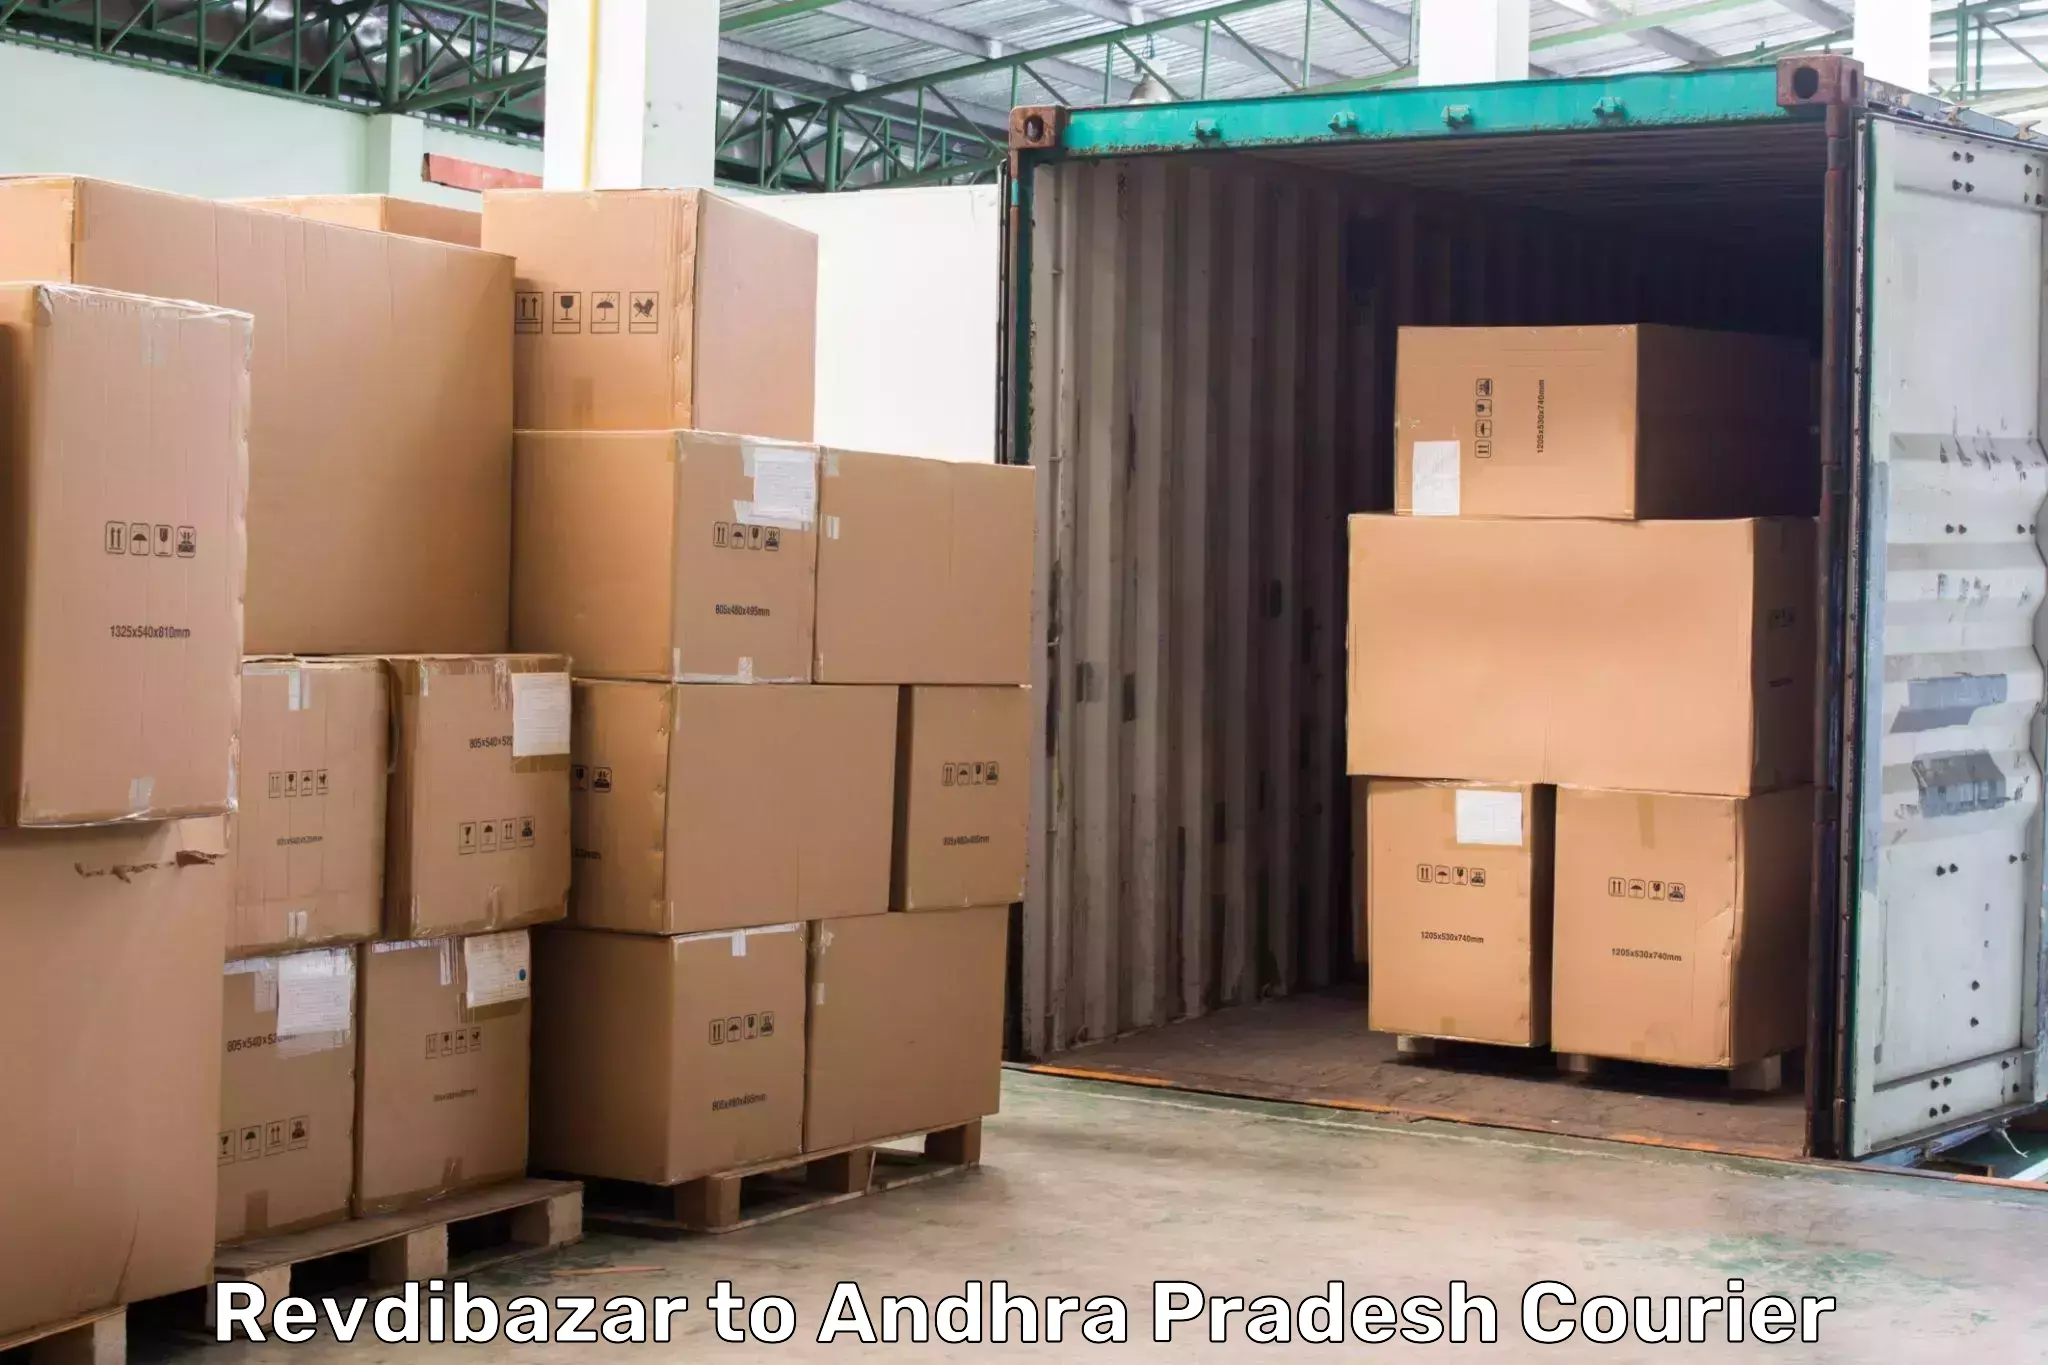 Nationwide parcel services Revdibazar to Mangalagiri